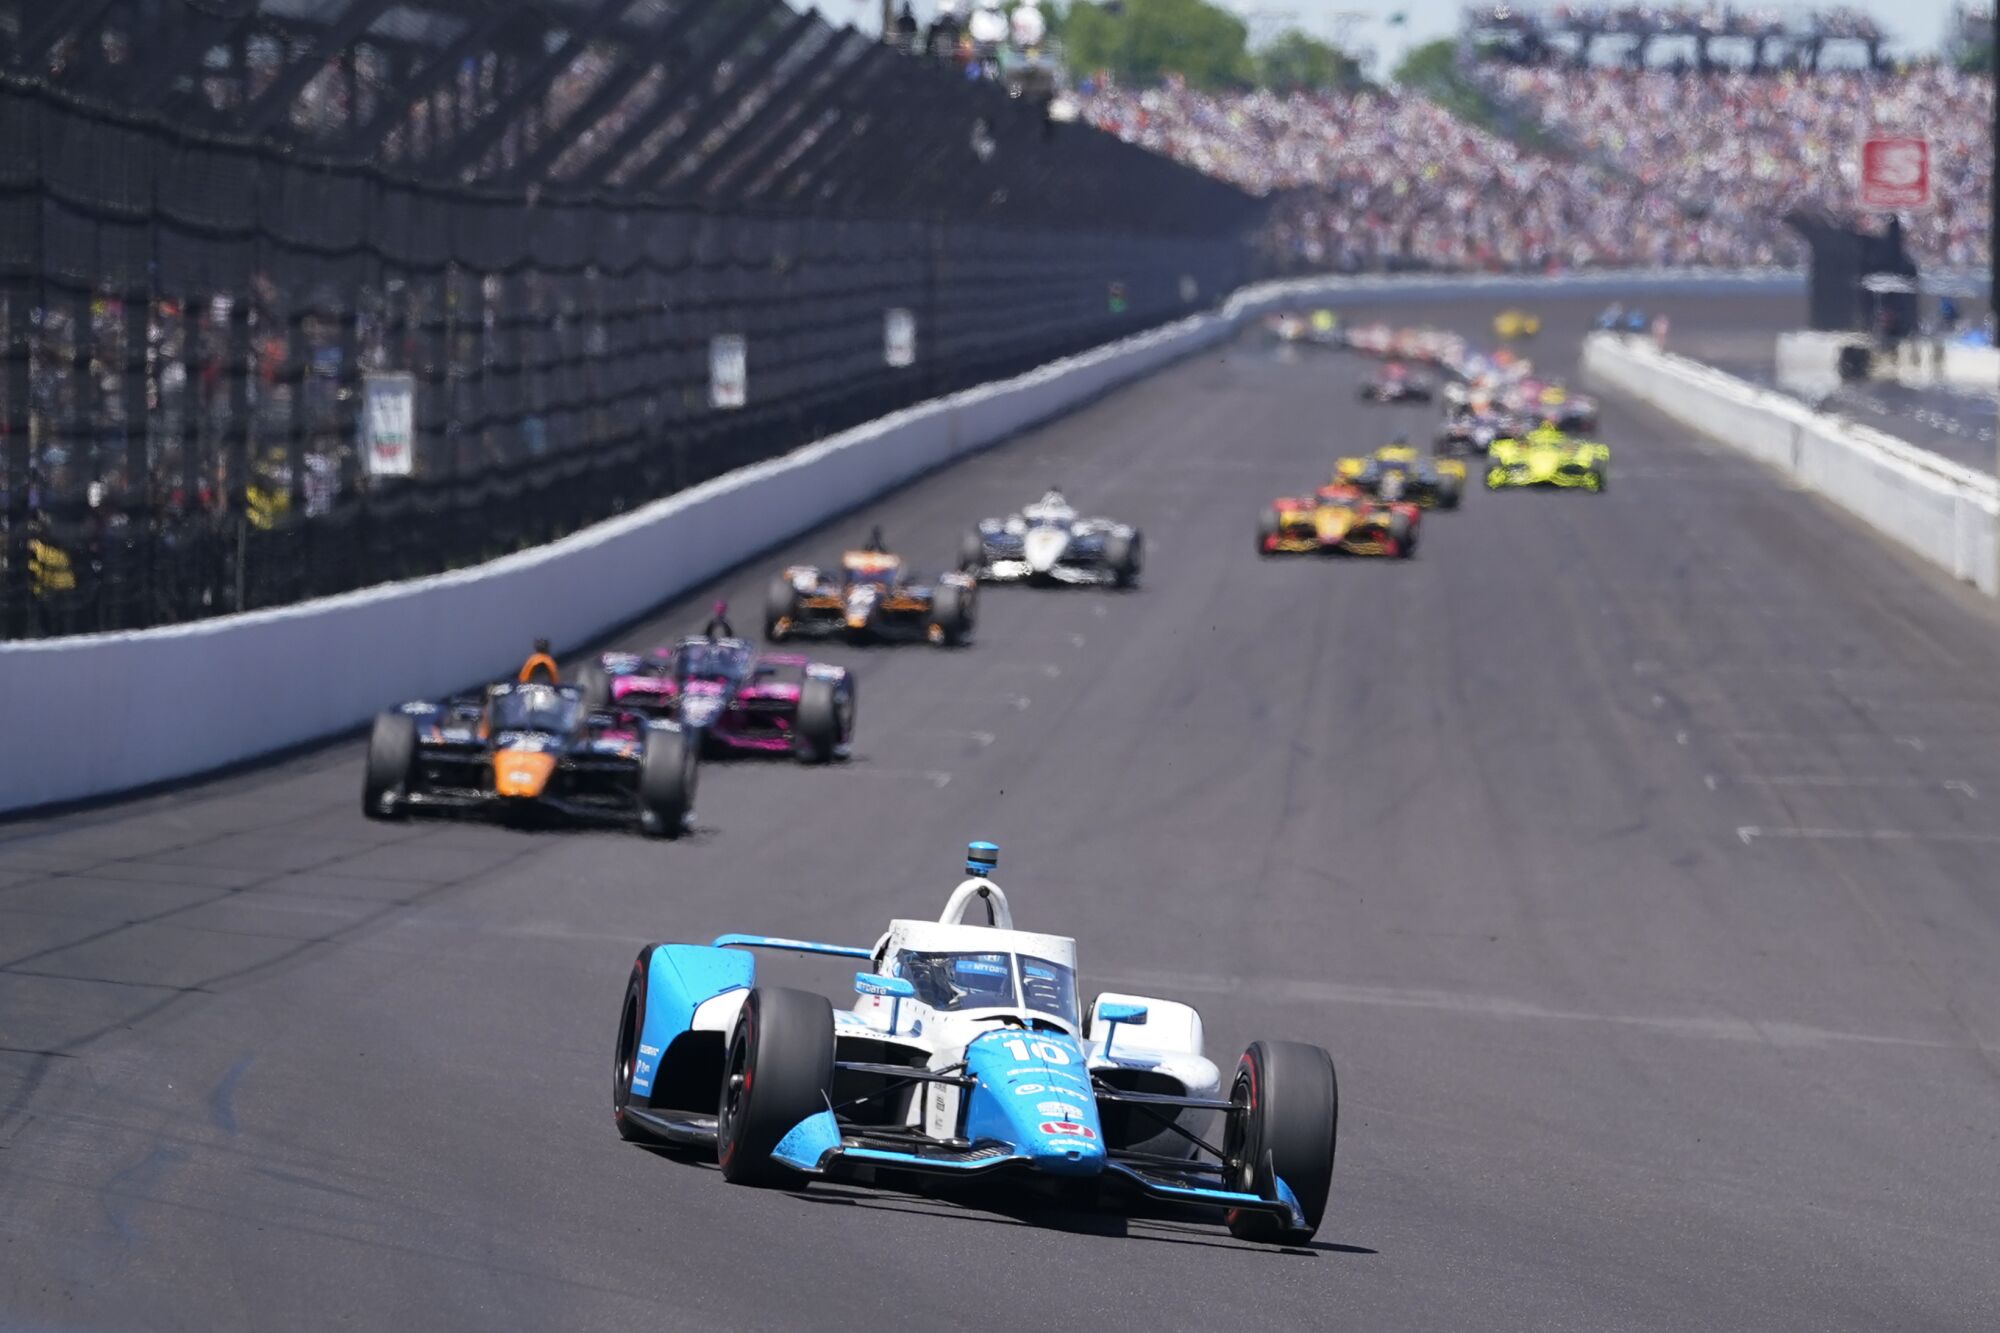 Alex Palou navigates into Turn 1 during the 2021 Indianapolis 500.